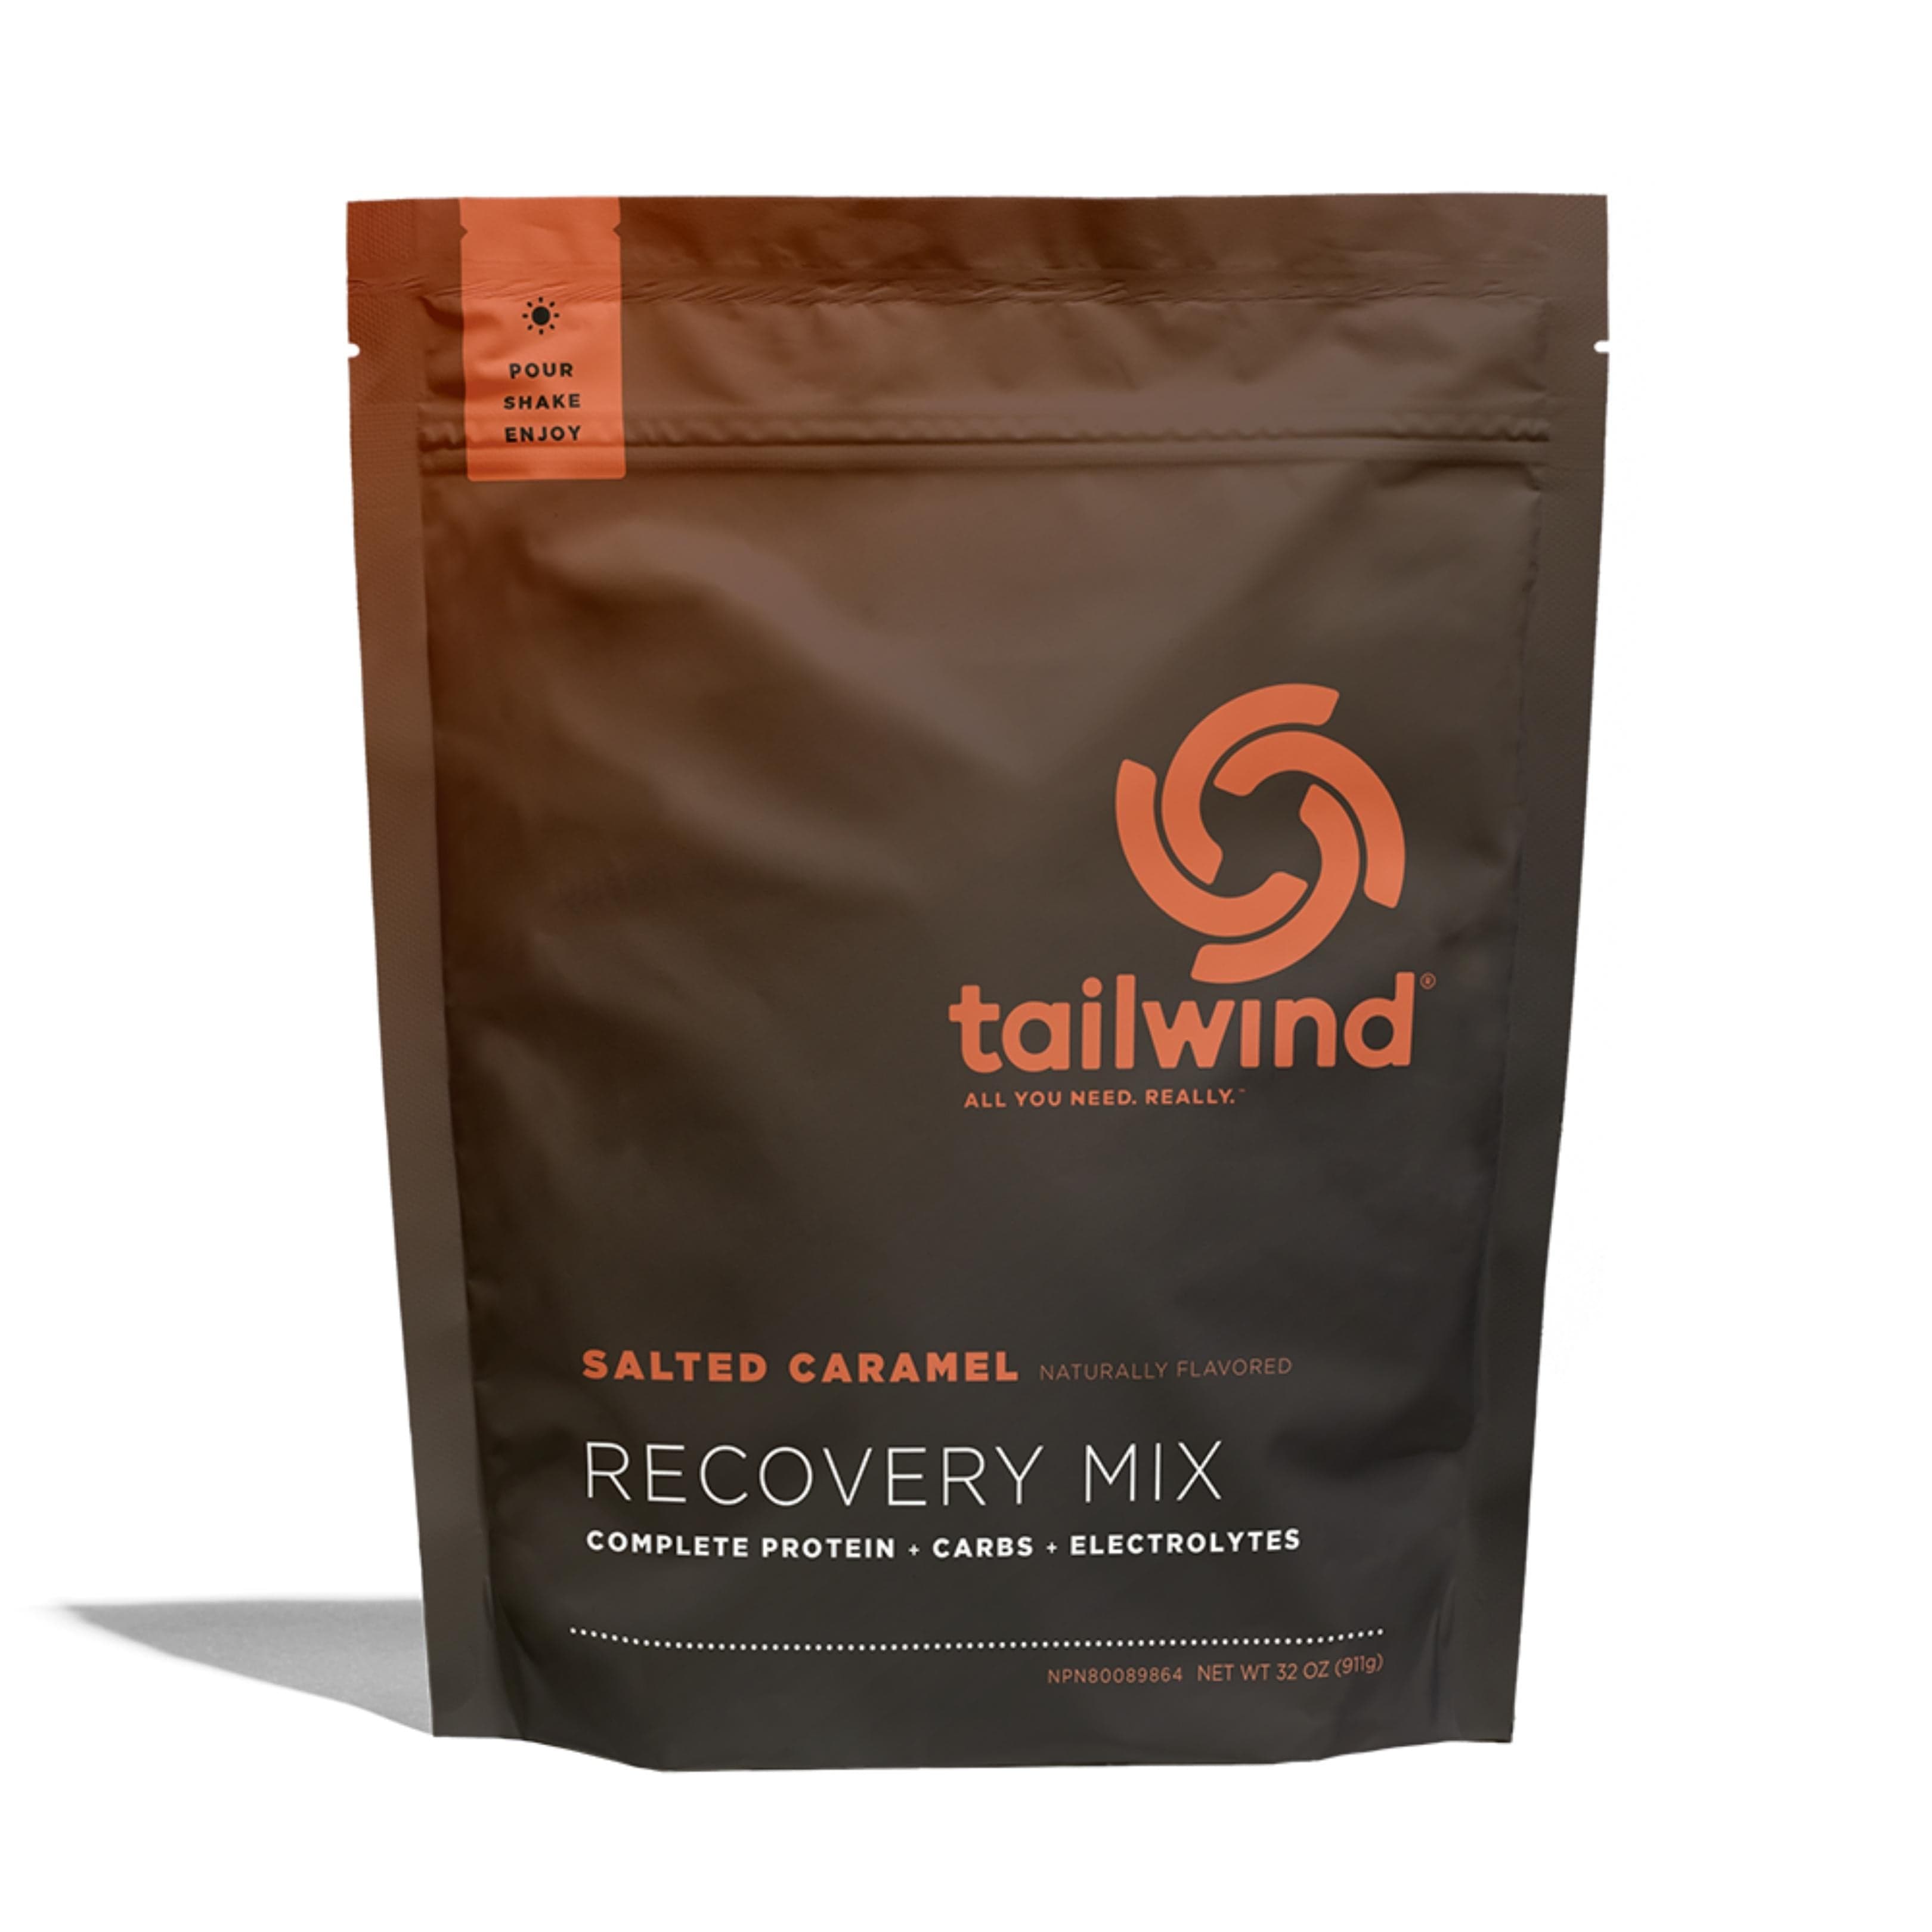 tailwind Nutrition Supplement Medium (30 serve) / Salted Caramel Rebuild Recovery Drink Mix 8 55283 00584 2